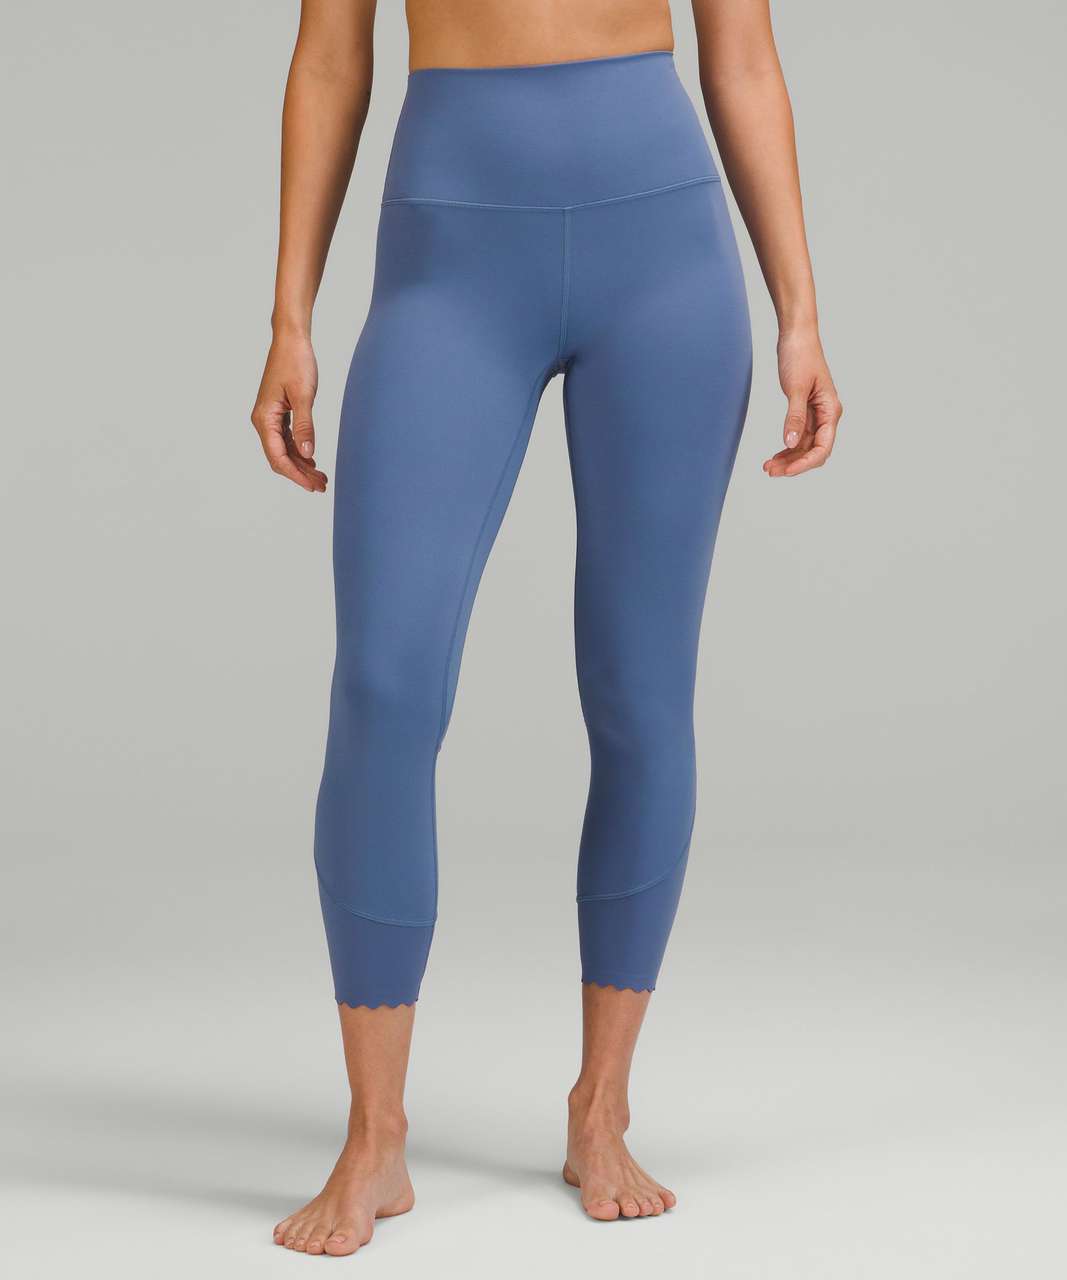 New with Tag Lululemon Align Pant 25 7/8 Length size 4 Water Drop